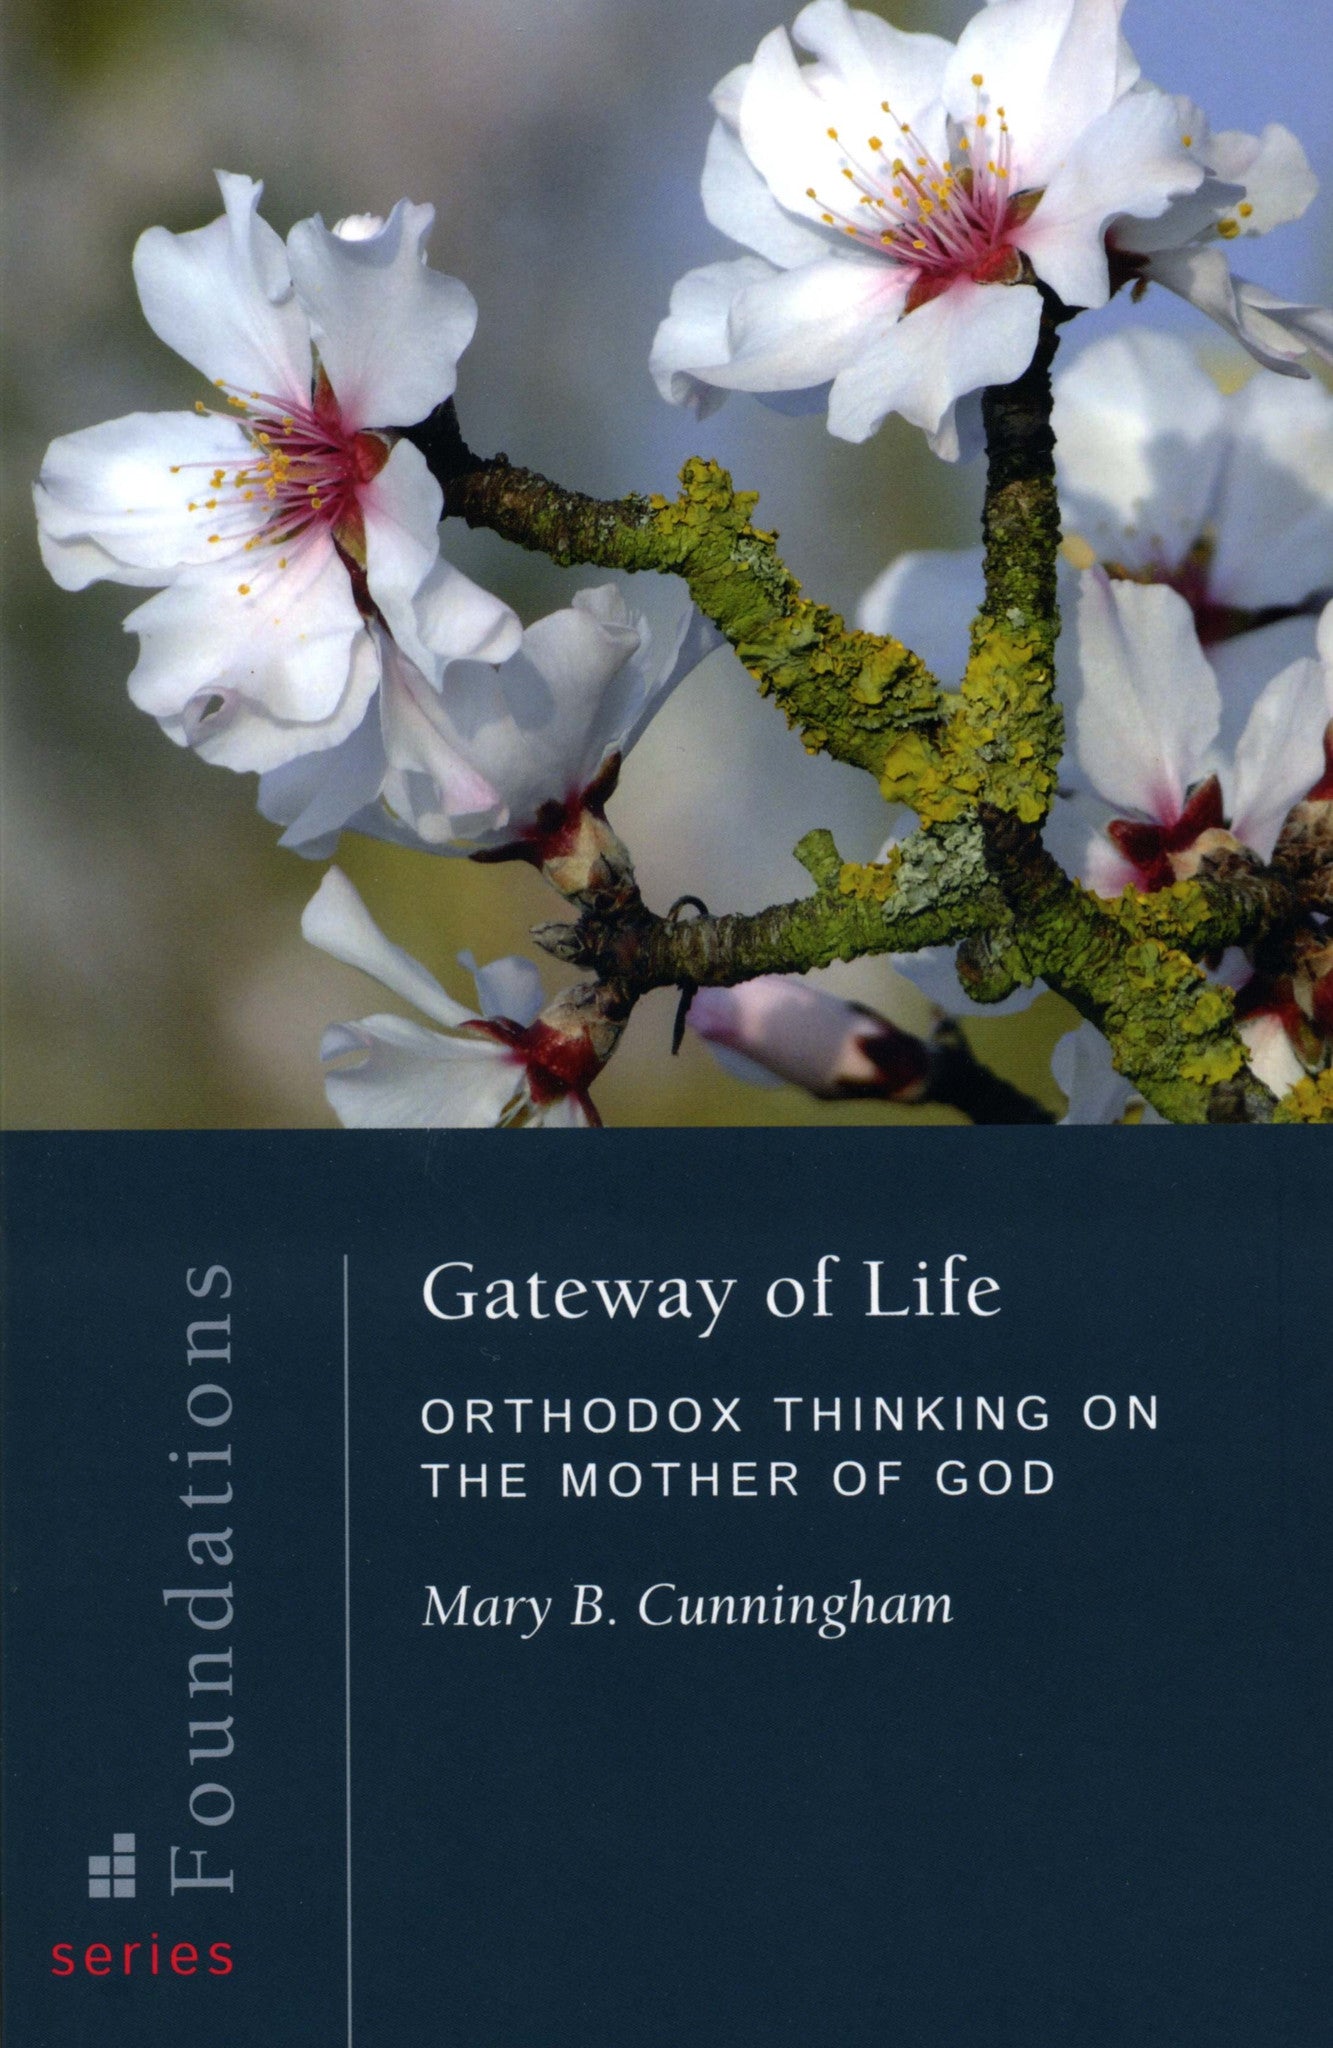 Foundations Series: Gateway of Life, Orthodox Thinking on The Mother of God